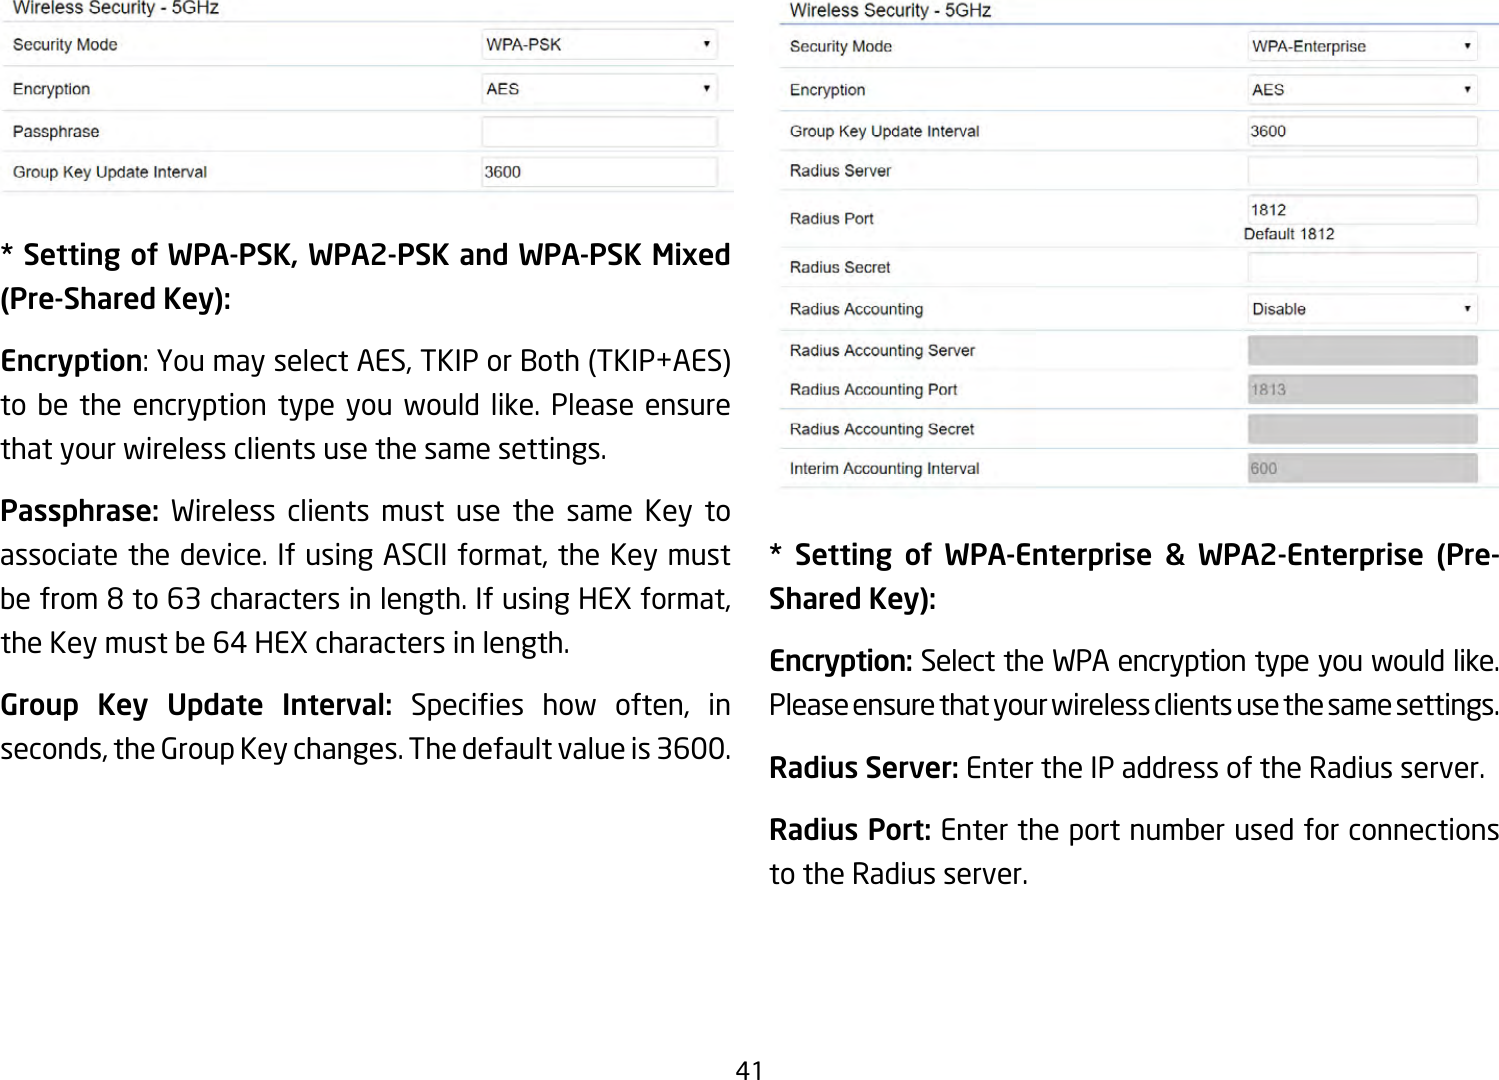 41* Setting of WPA-PSK, WPA2-PSK and WPA-PSK Mixed (Pre-Shared Key):Encryption:YoumayselectAES,TKIPorBoth(TKIP+AES)to be the encryption type you would like. Please ensure that your wireless clients use the same settings.Passphrase:  Wireless clients must use the same Key to associatethedevice.IfusingASCIIformat,theKeymustbefrom8to63charactersinlength.IfusingHEXformat,theKeymustbe64HEXcharactersinlength.Group Key Update Interval: Species how often, inseconds,theGroupKeychanges.Thedefaultvalueis3600.** Setting of WPA-Enterprise &amp; WPA2-Enterprise (Pre-Shared Key):Encryption: Select the WPA encryption type you would like. Please ensure that your wireless clients use the same settings.Radius Server: Enter the IP address of the Radius server.Radius Port: Enter the port number used for connections to the Radius server.